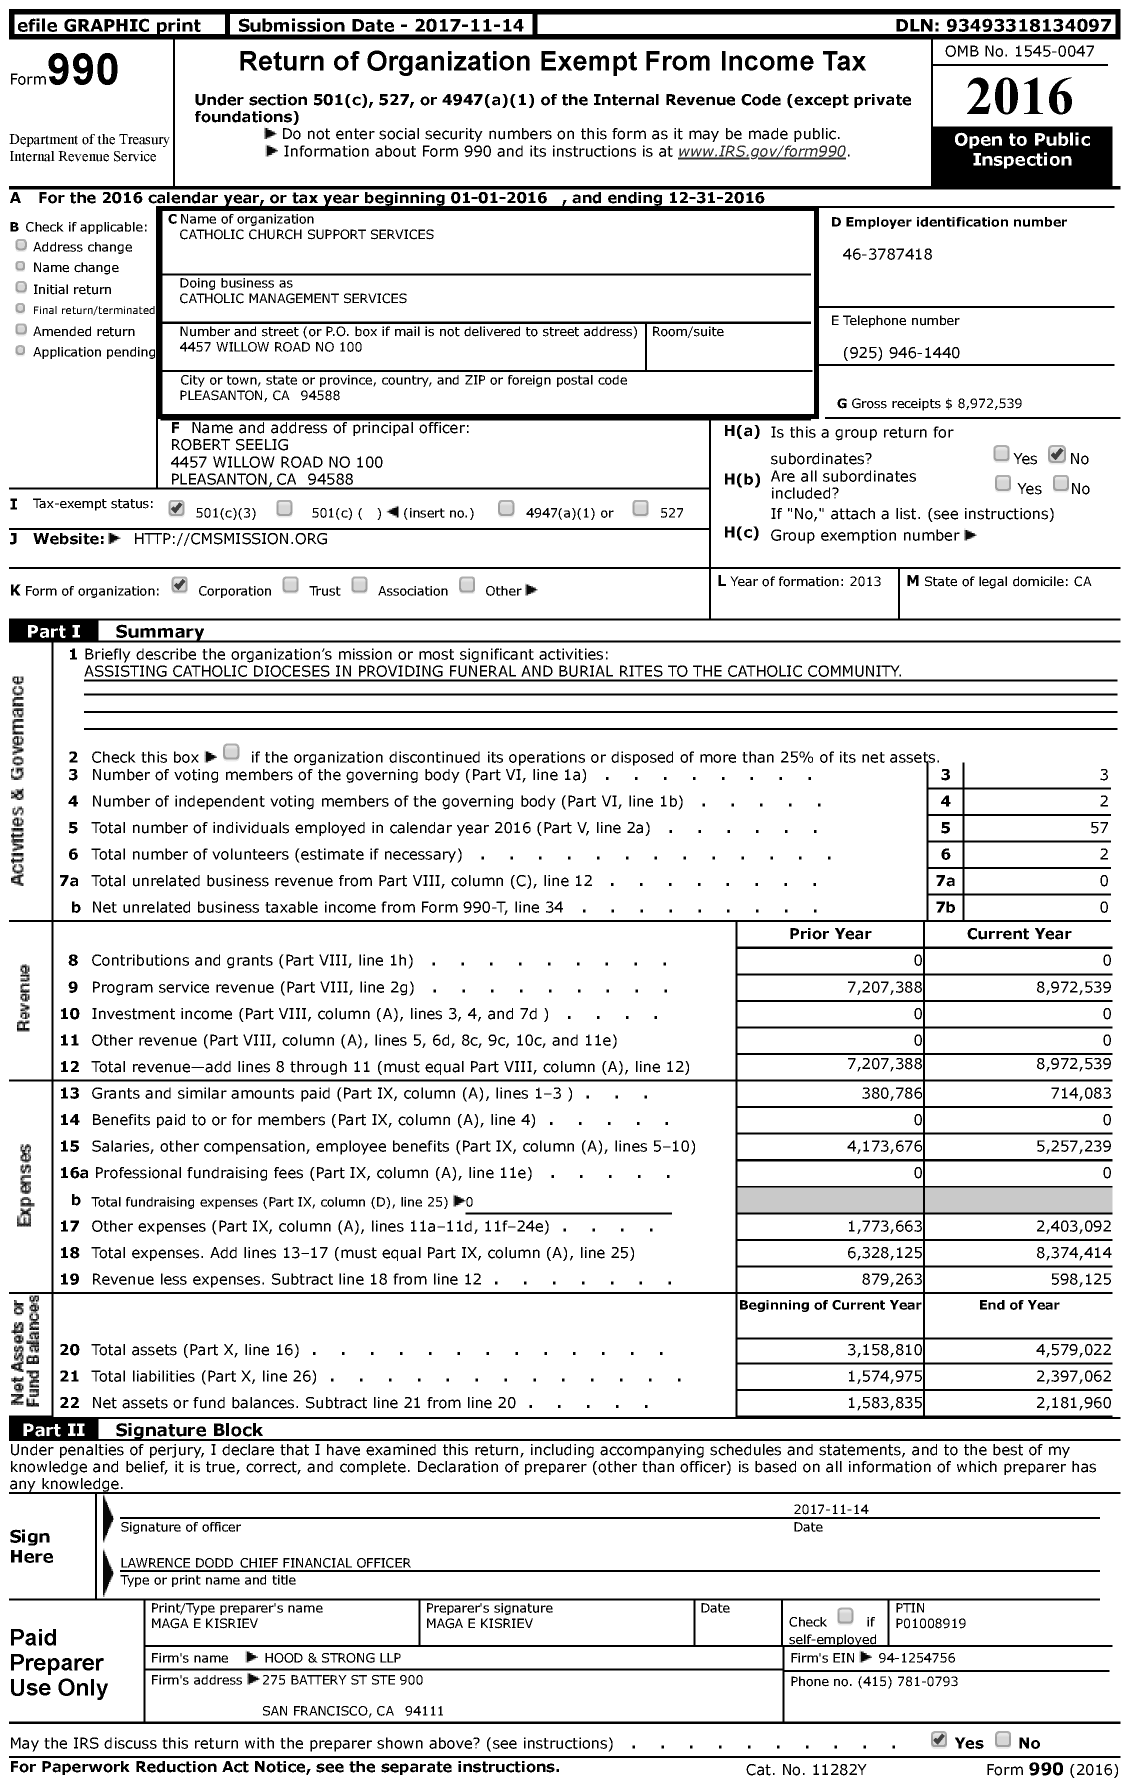 Image of first page of 2016 Form 990 for Catholic Management Services (CMS)